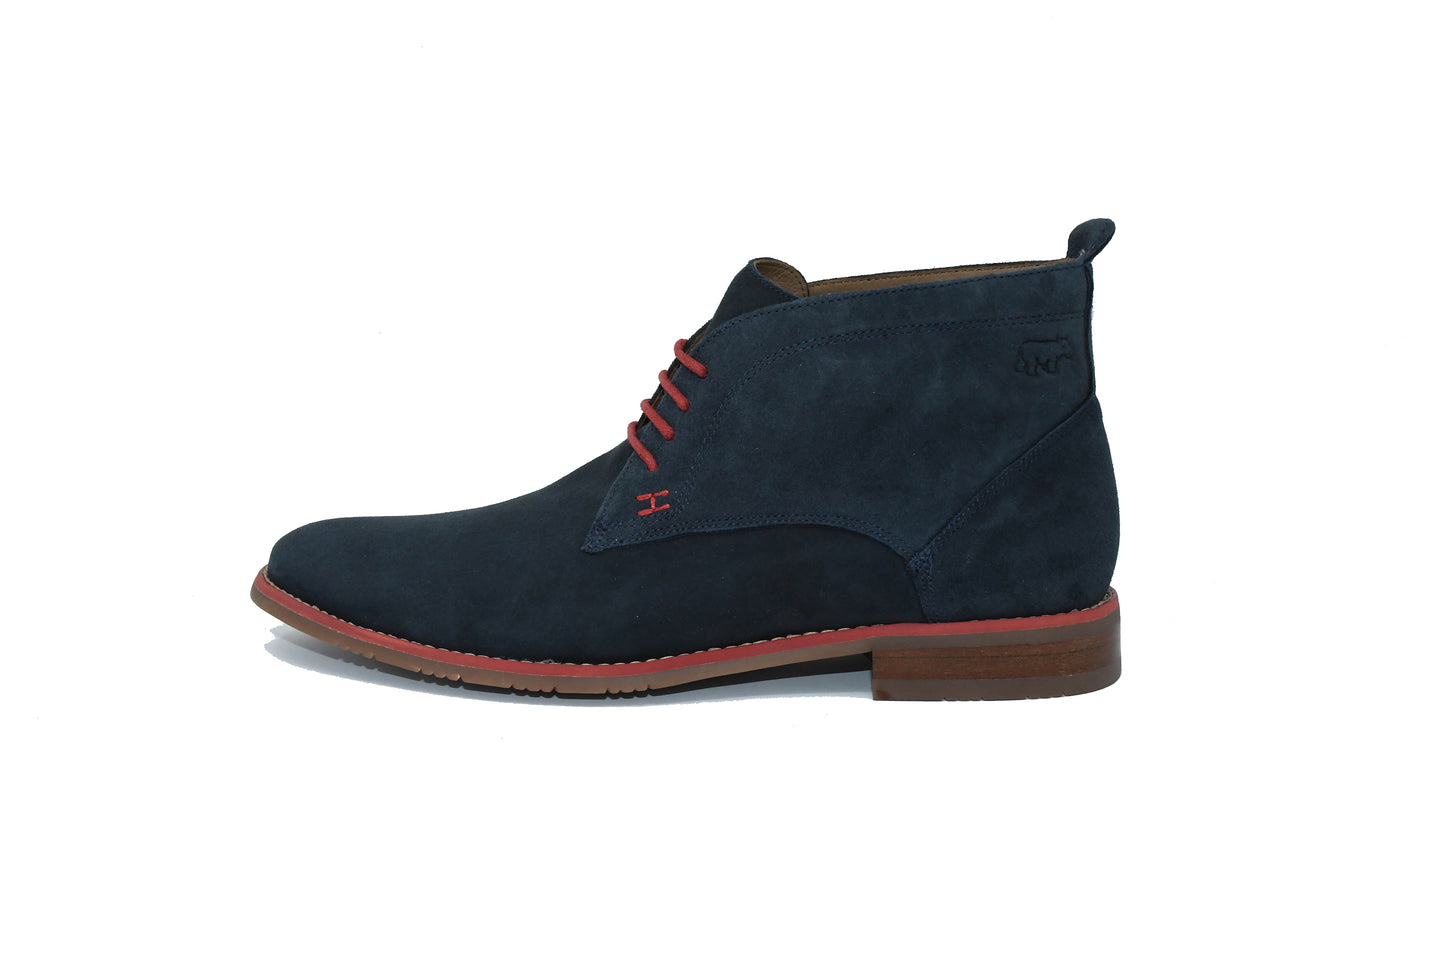 HIPPY CHIC BOOTS -  NAVY BLUE AND RED